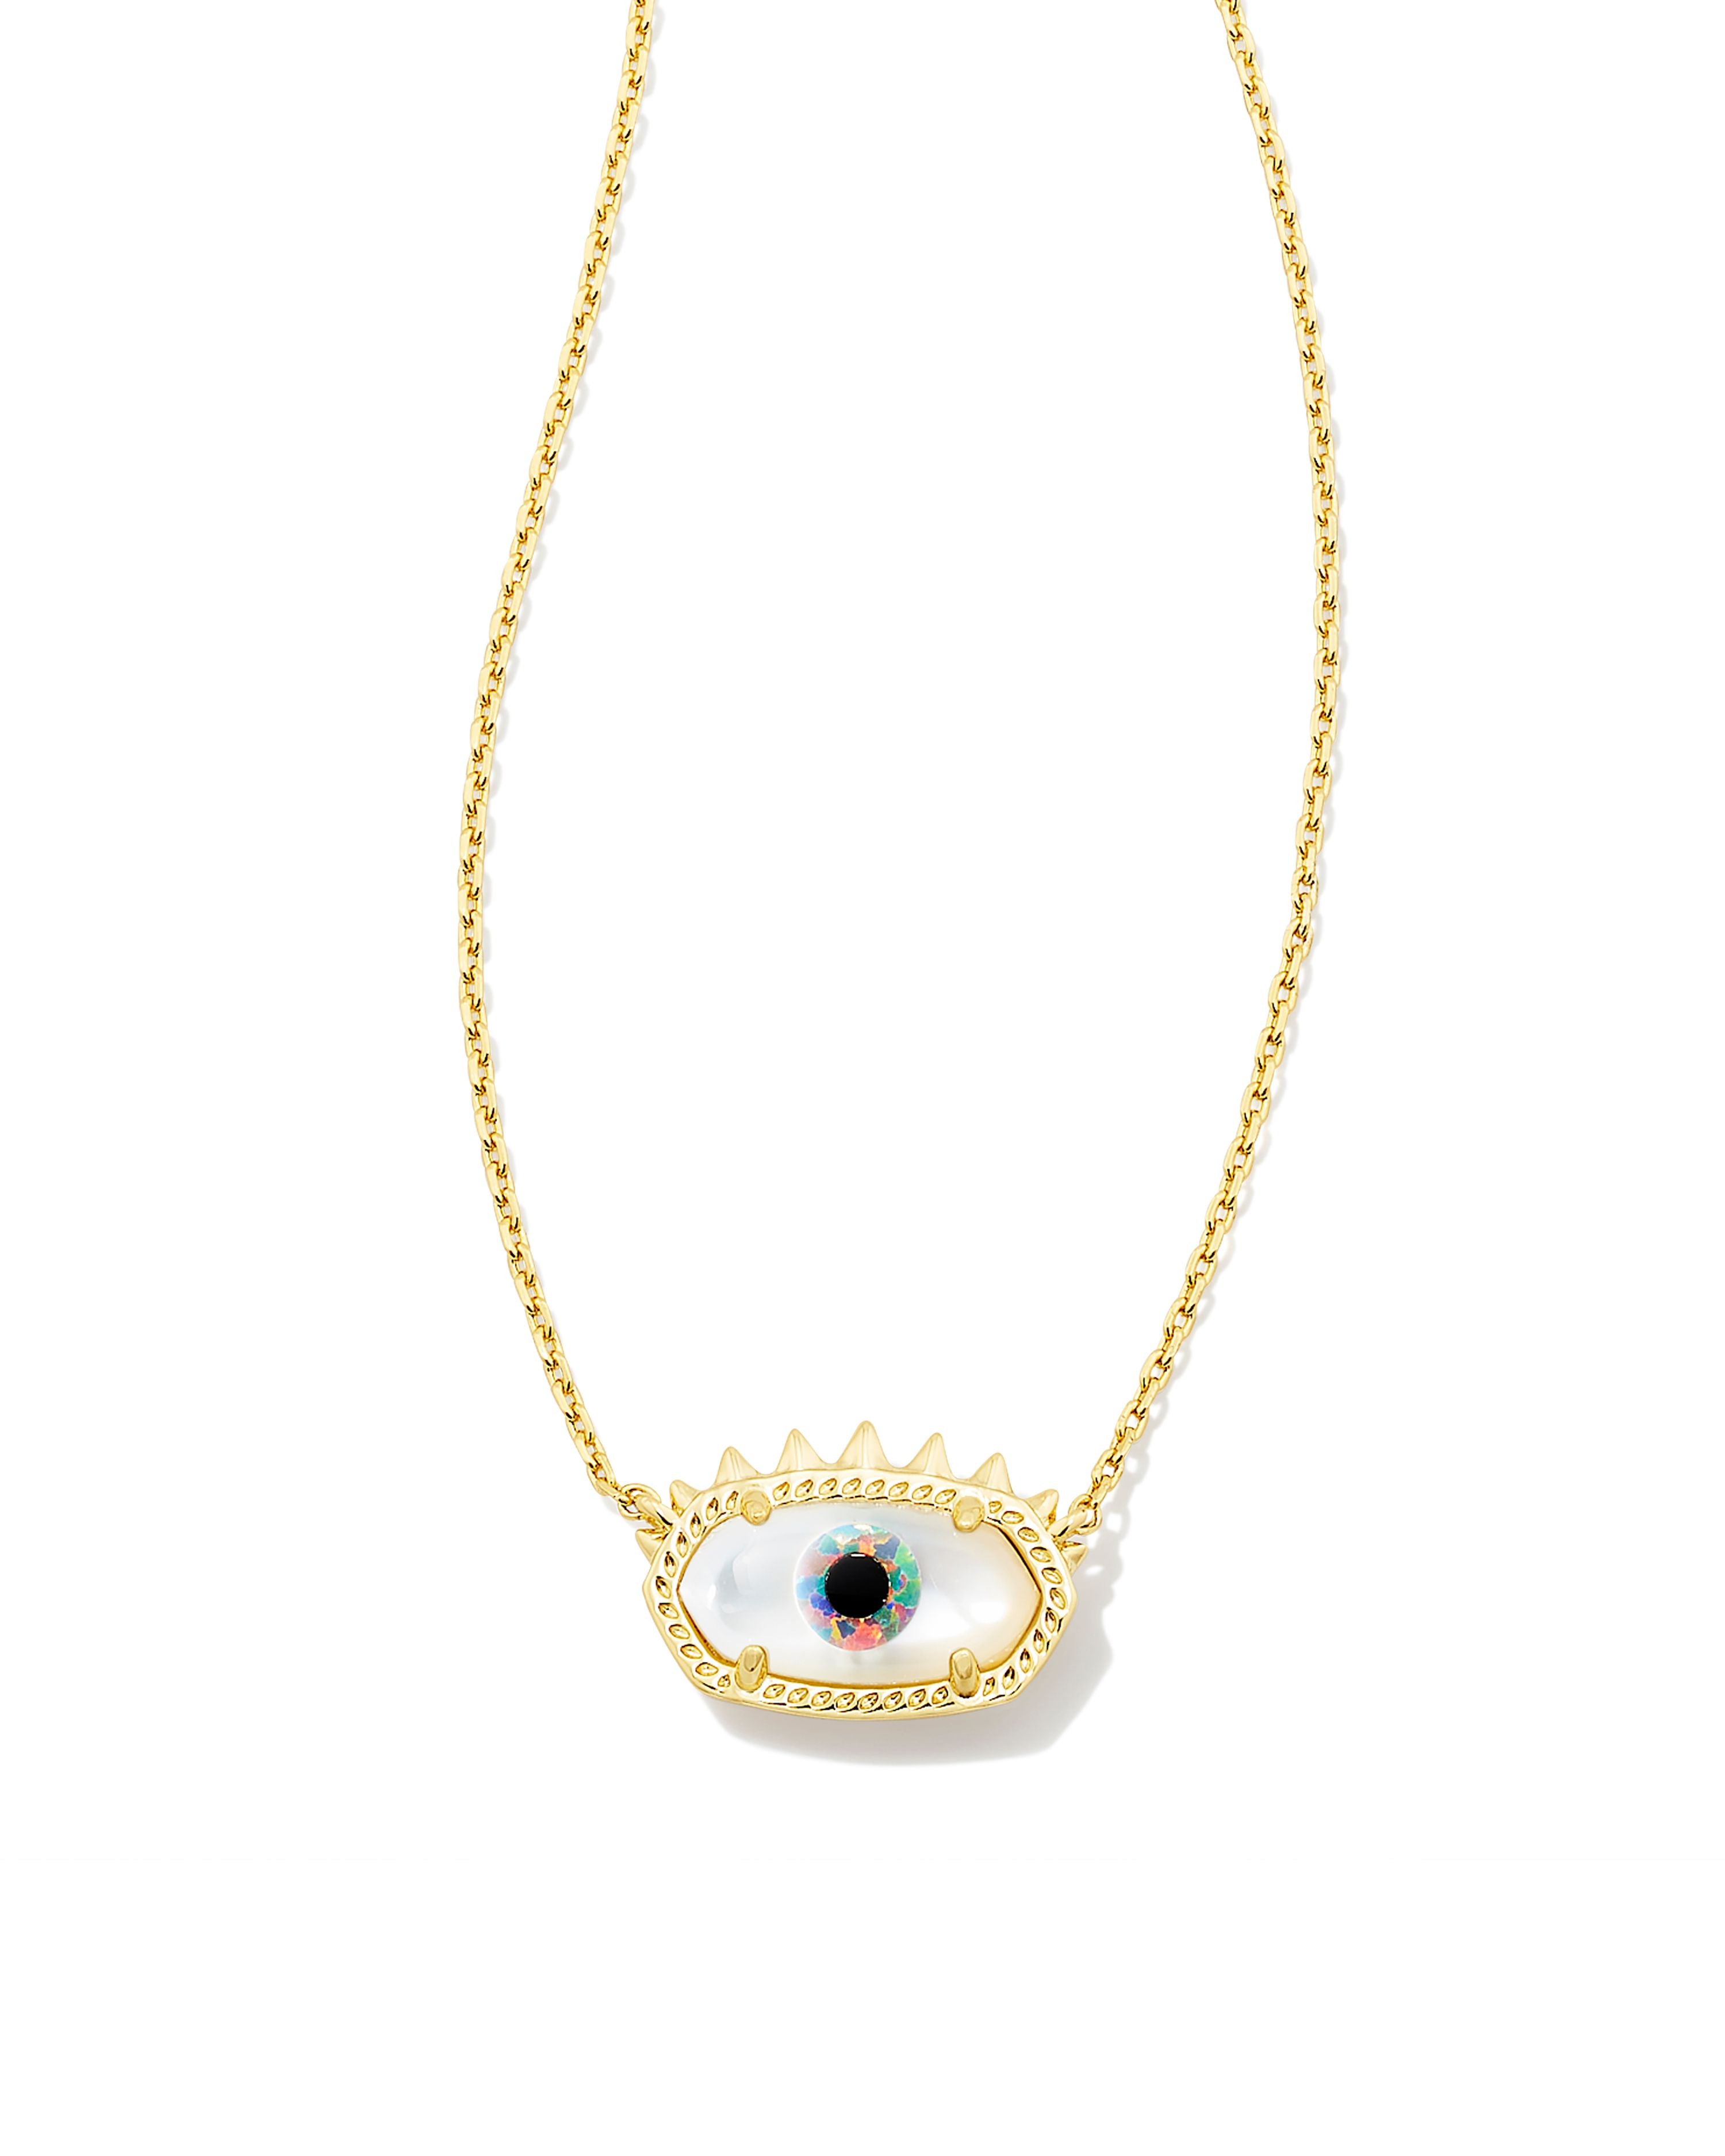 Kendra Scott Elisa Evil Eye Oval Pendant Necklace in Ivory Mother of Pearl and Gold